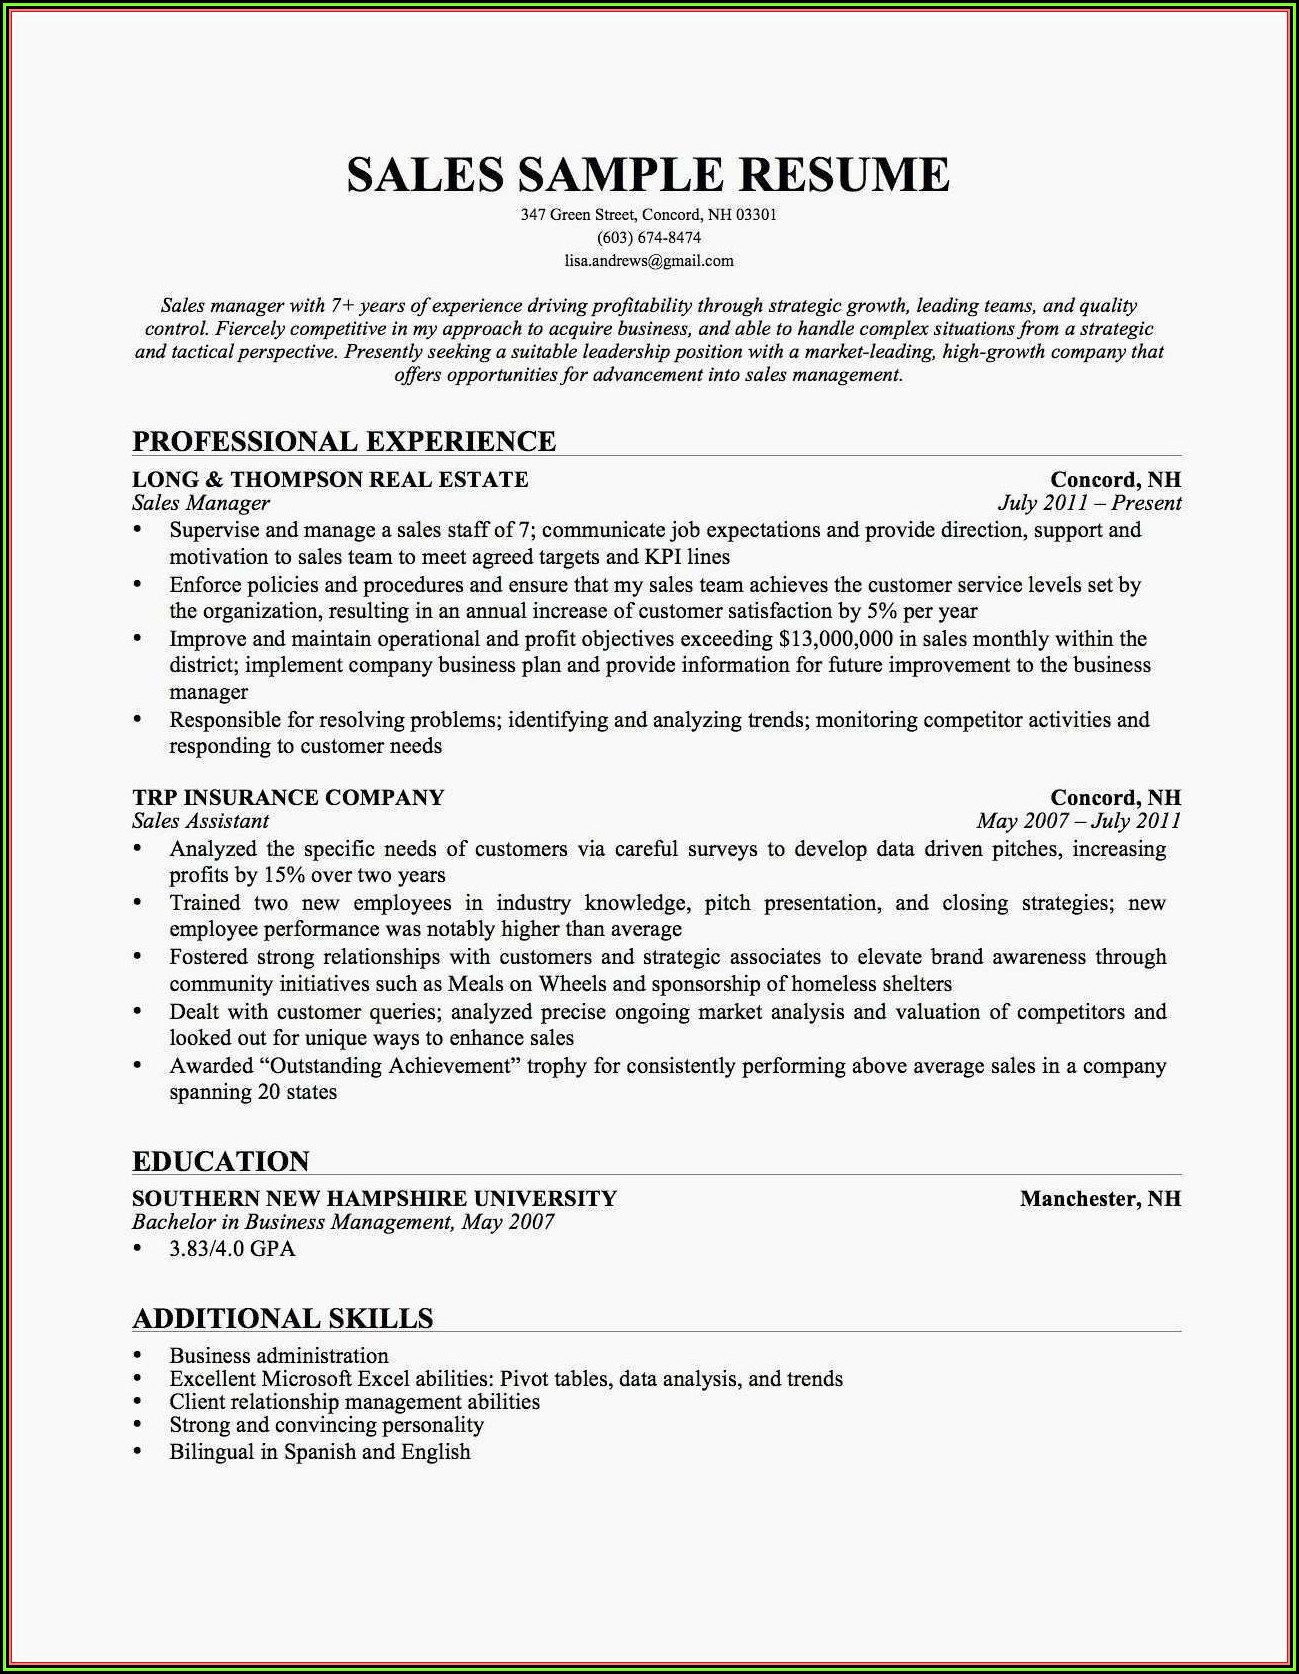 Free Resume Templates Education Administration